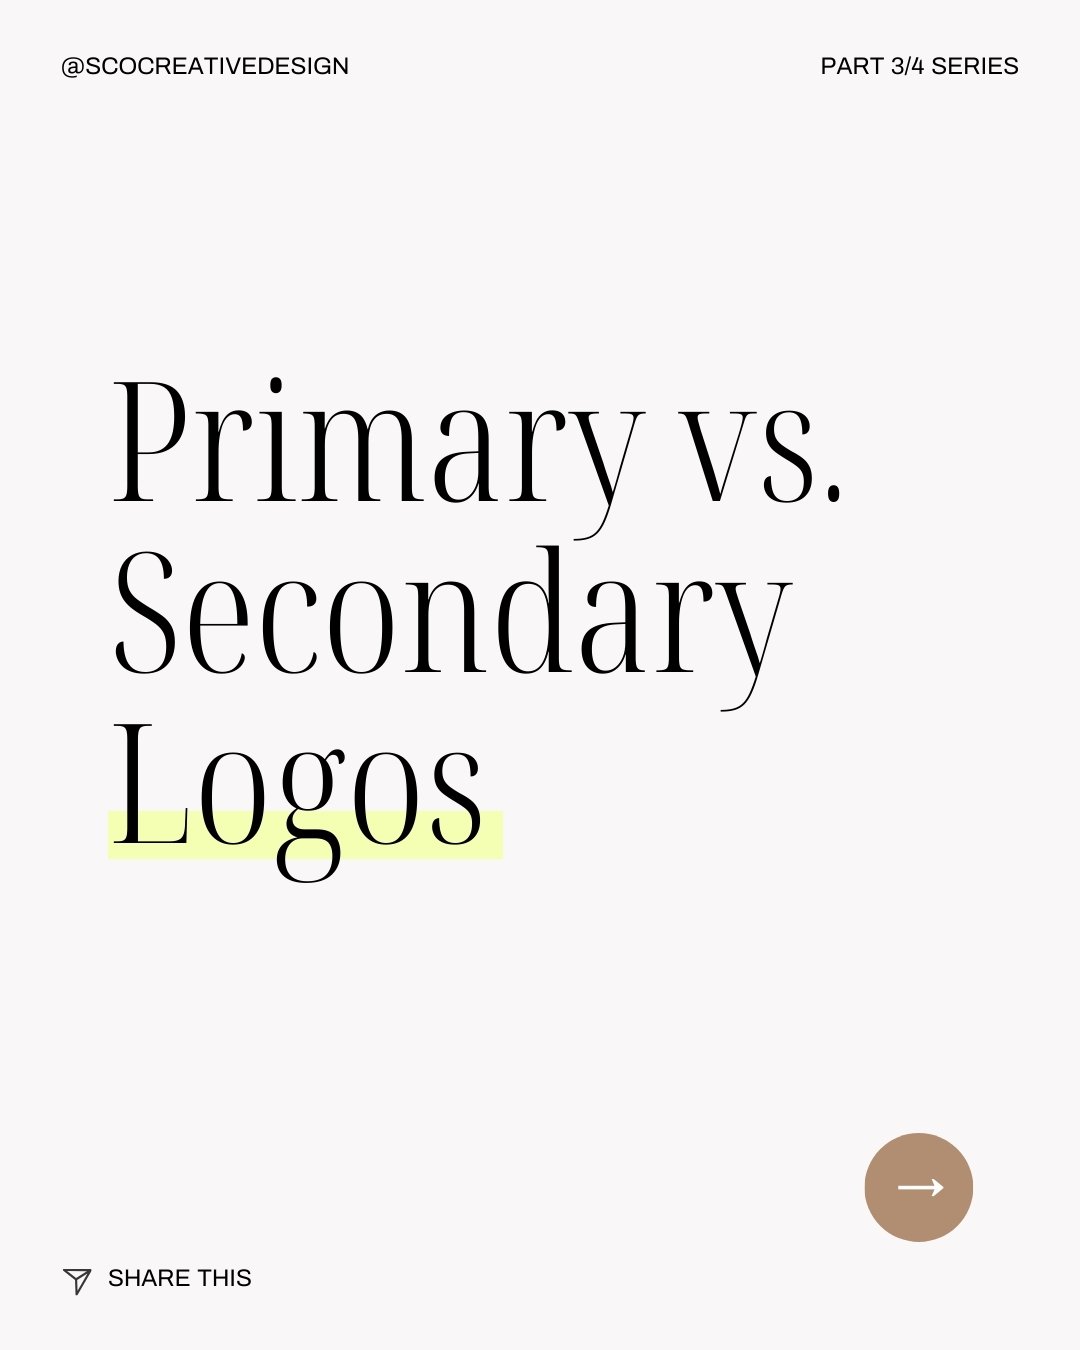 Part 3 in our Custom Brand Design Process and Deliverables Series is the Primary and Secondary Logos.

As part of our custom design process, we not only provide you with a strategic primary logo, we also provide up to two variations of the primary an